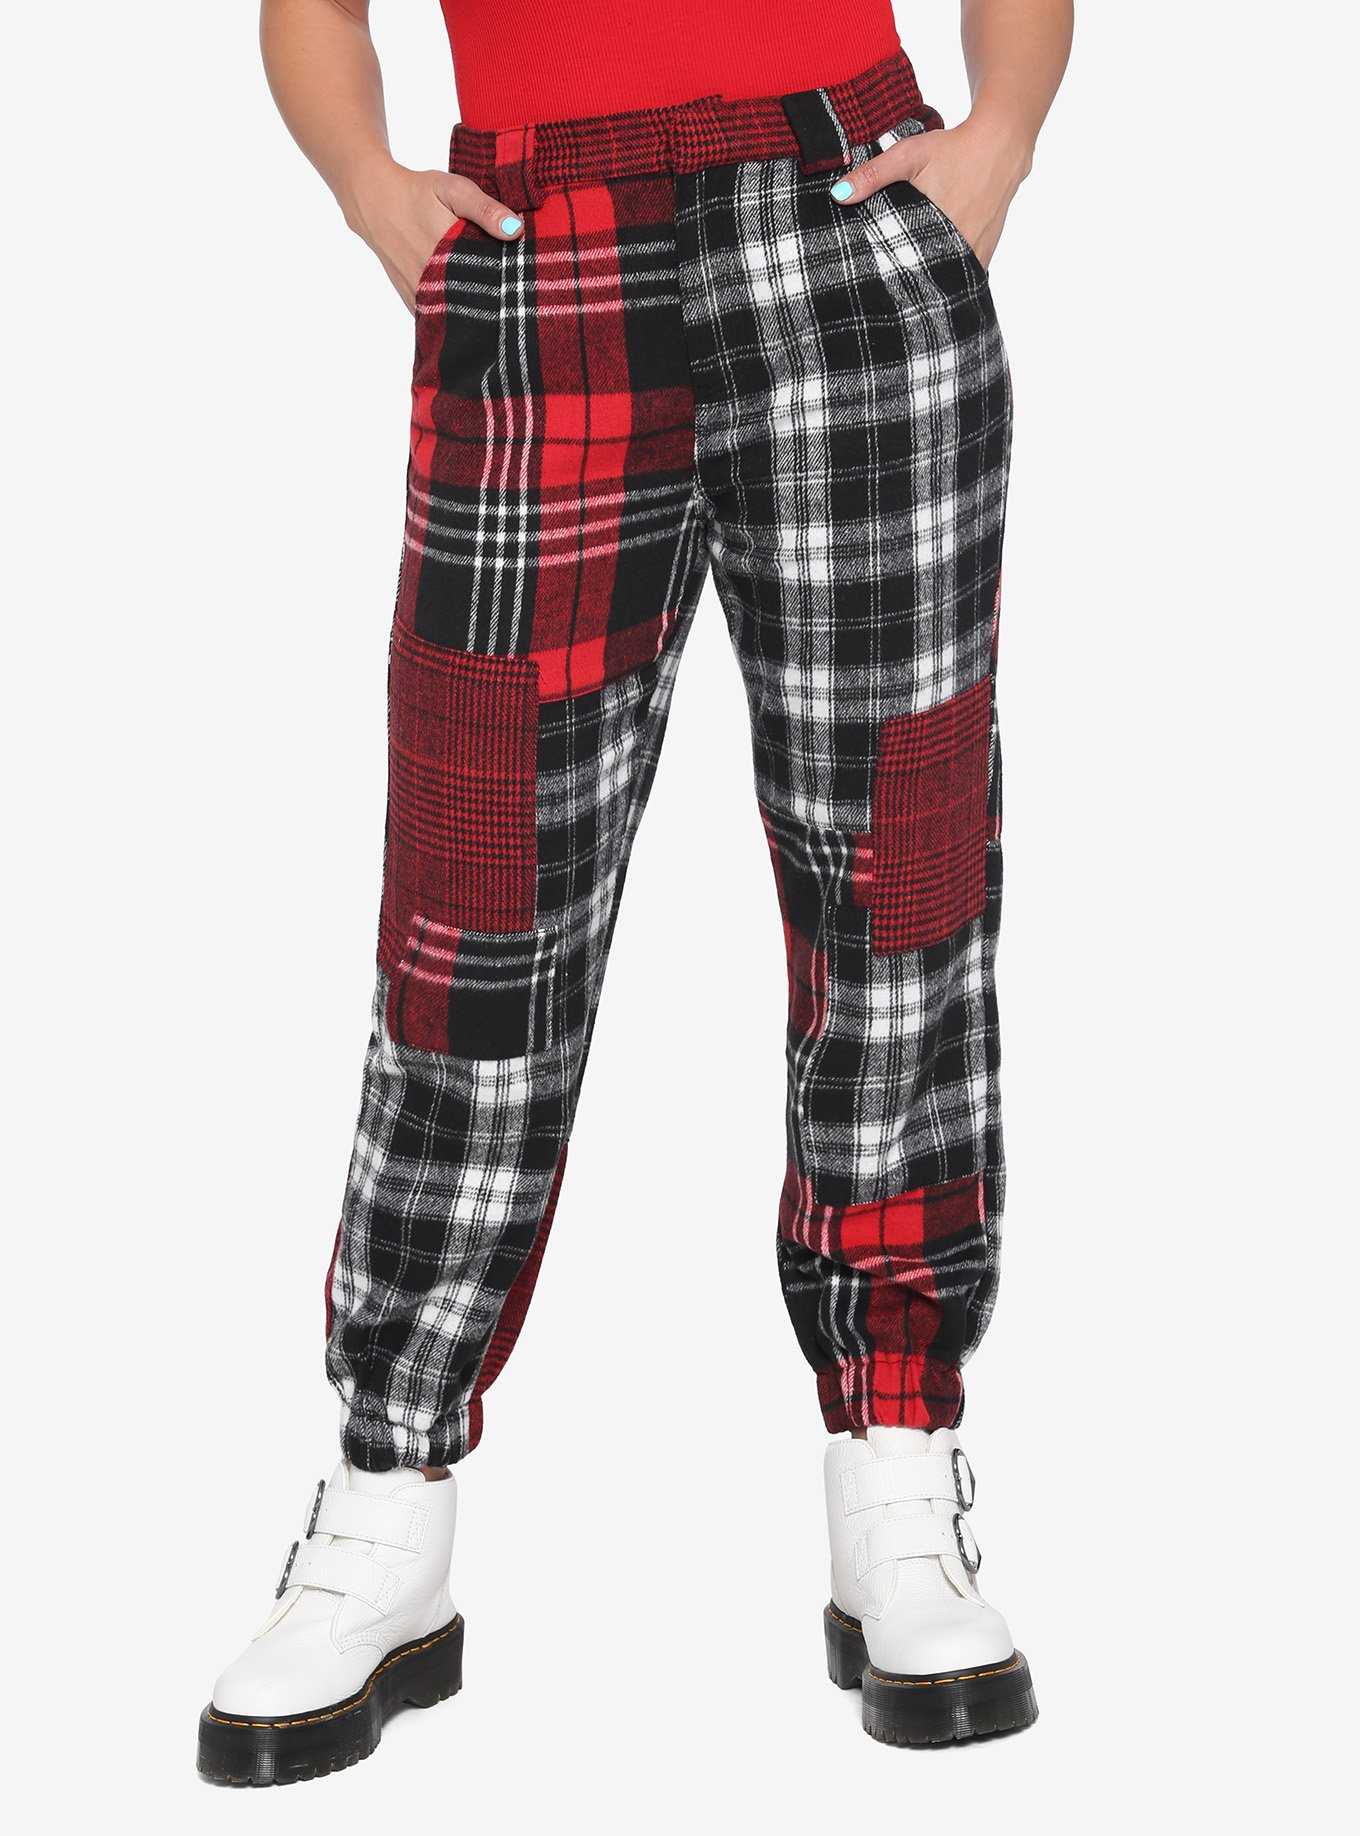 Hot Topic Pink Plaid Pants size M Size M - $24 - From Carmen